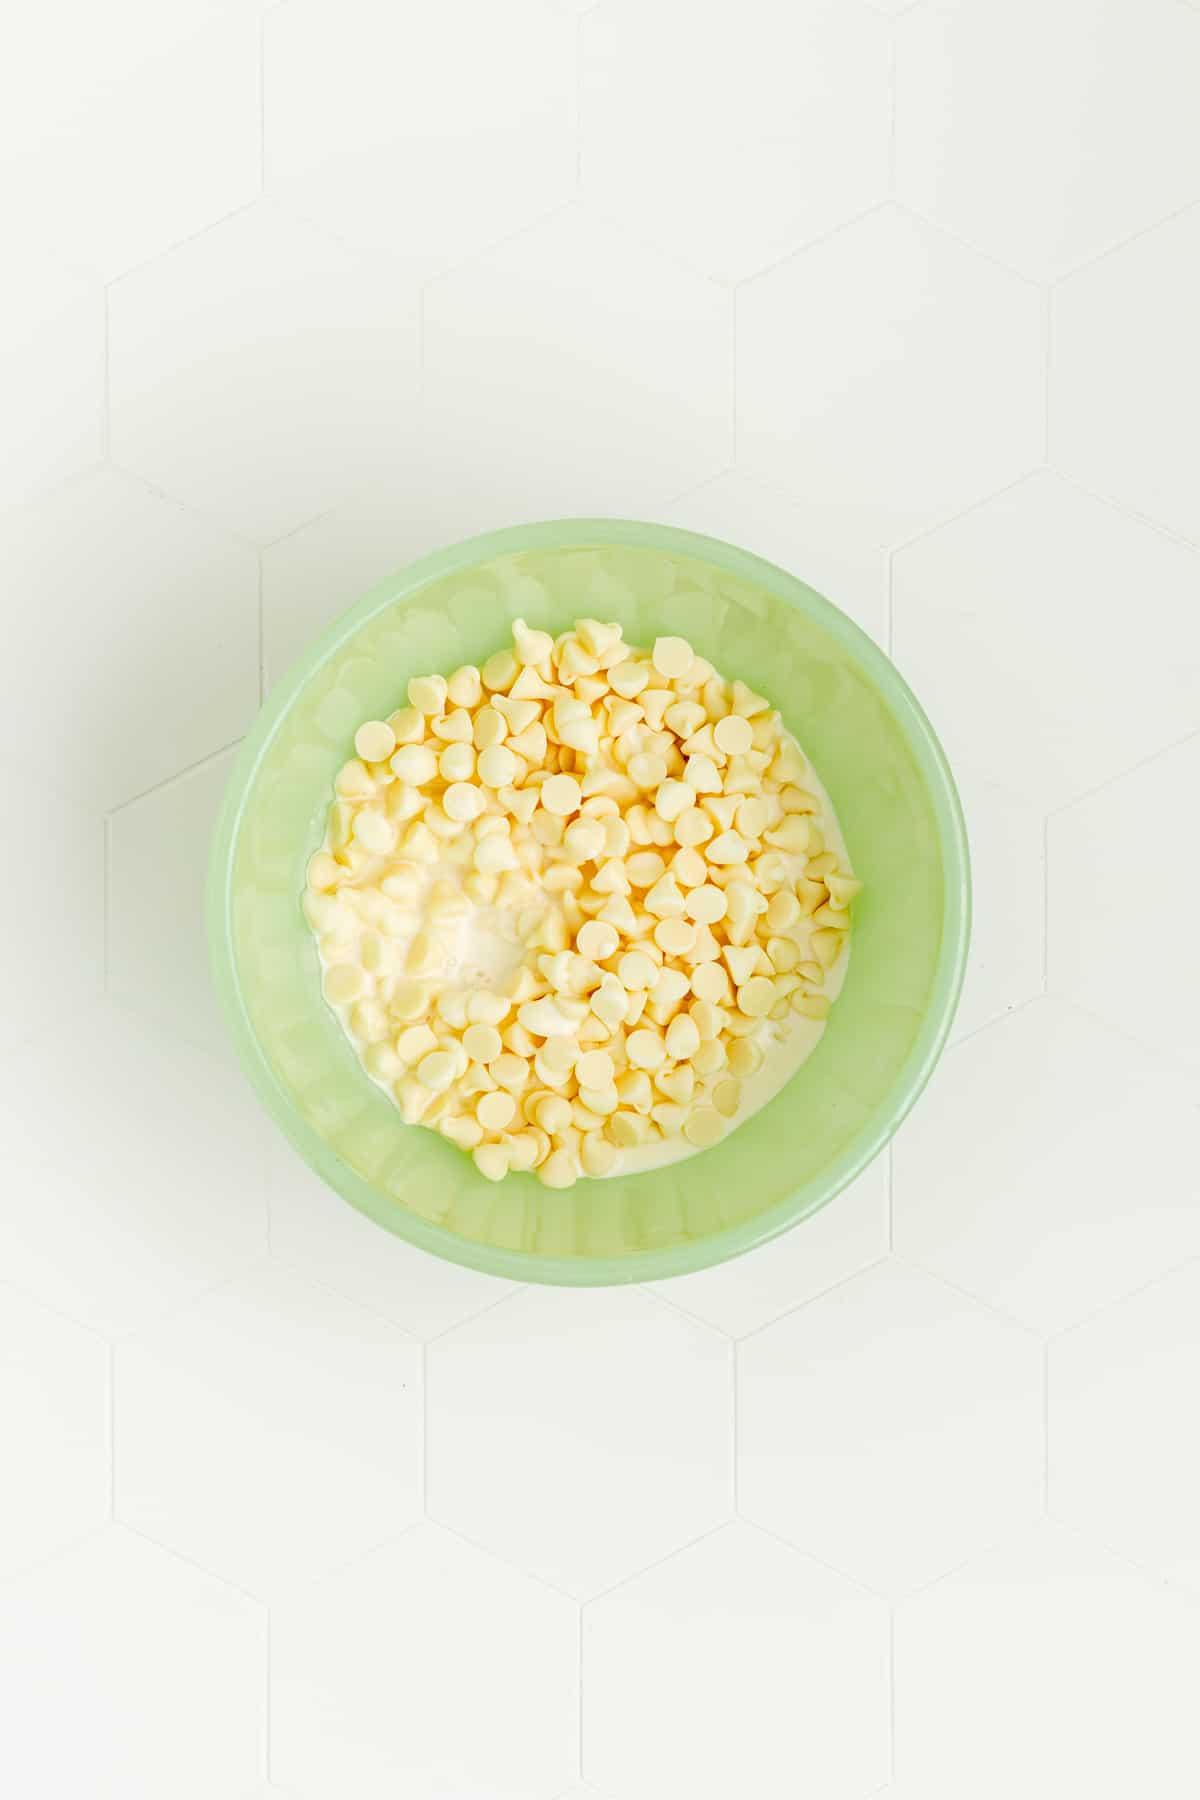 heavy cream and white chocolate chips in green glass bowl on white background.